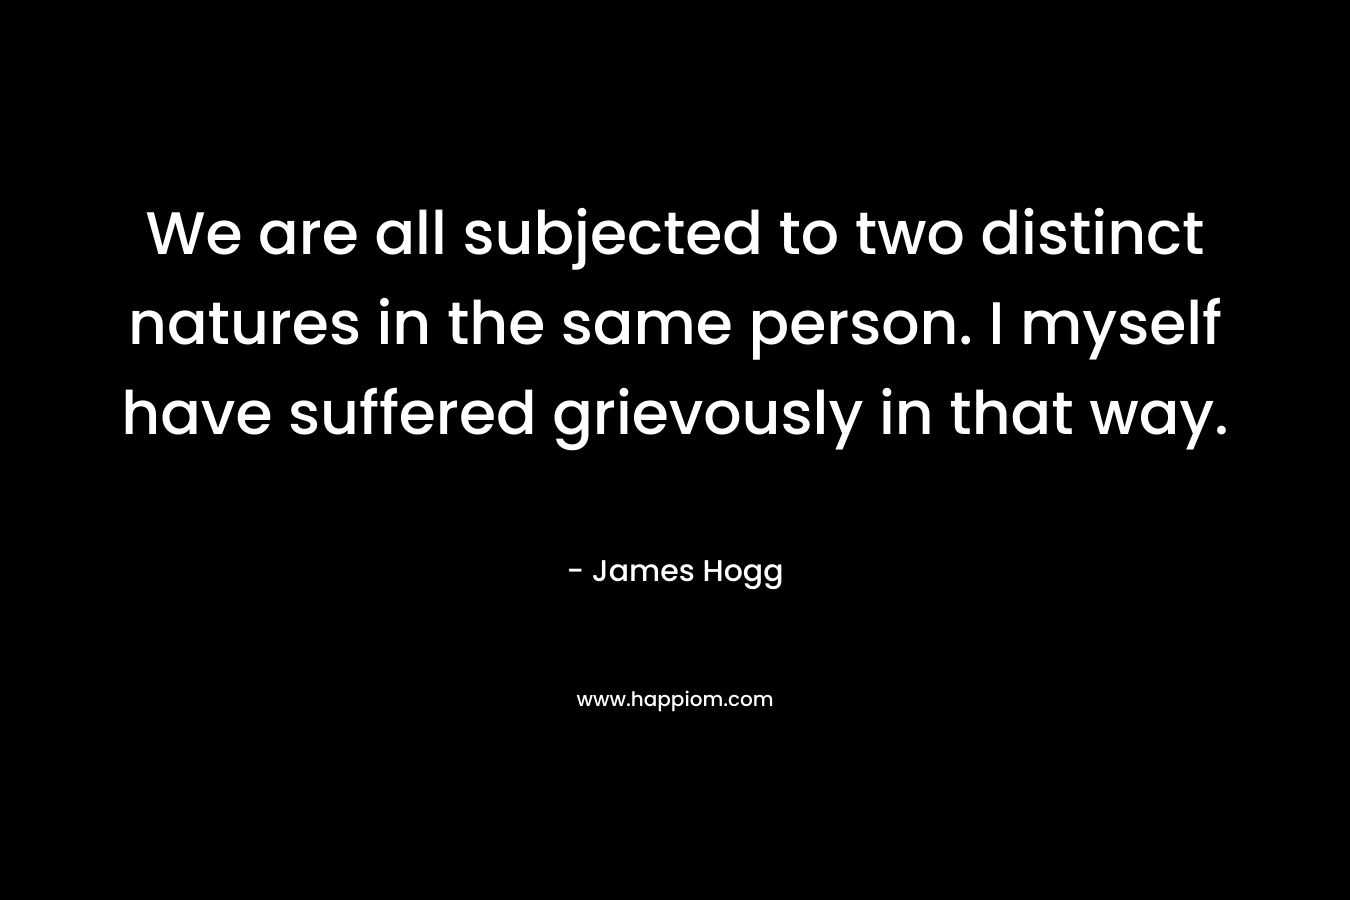 We are all subjected to two distinct natures in the same person. I myself have suffered grievously in that way. – James Hogg